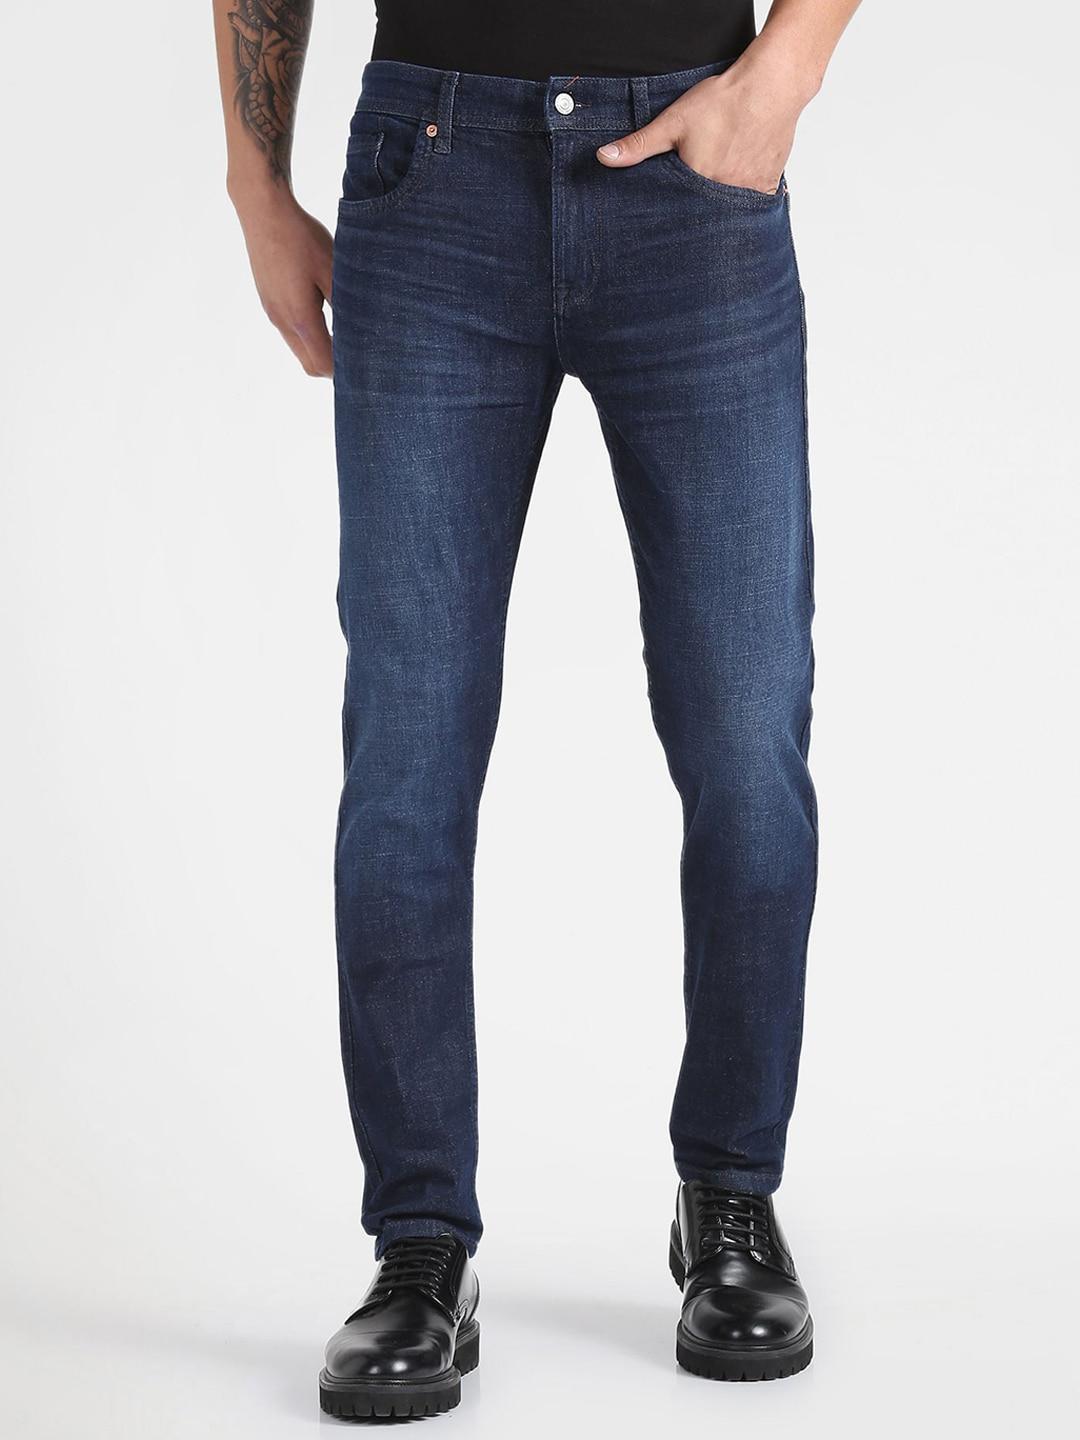 flying-machine-men-tapered-fit-light-fade-clean-look-stretchable-jeans